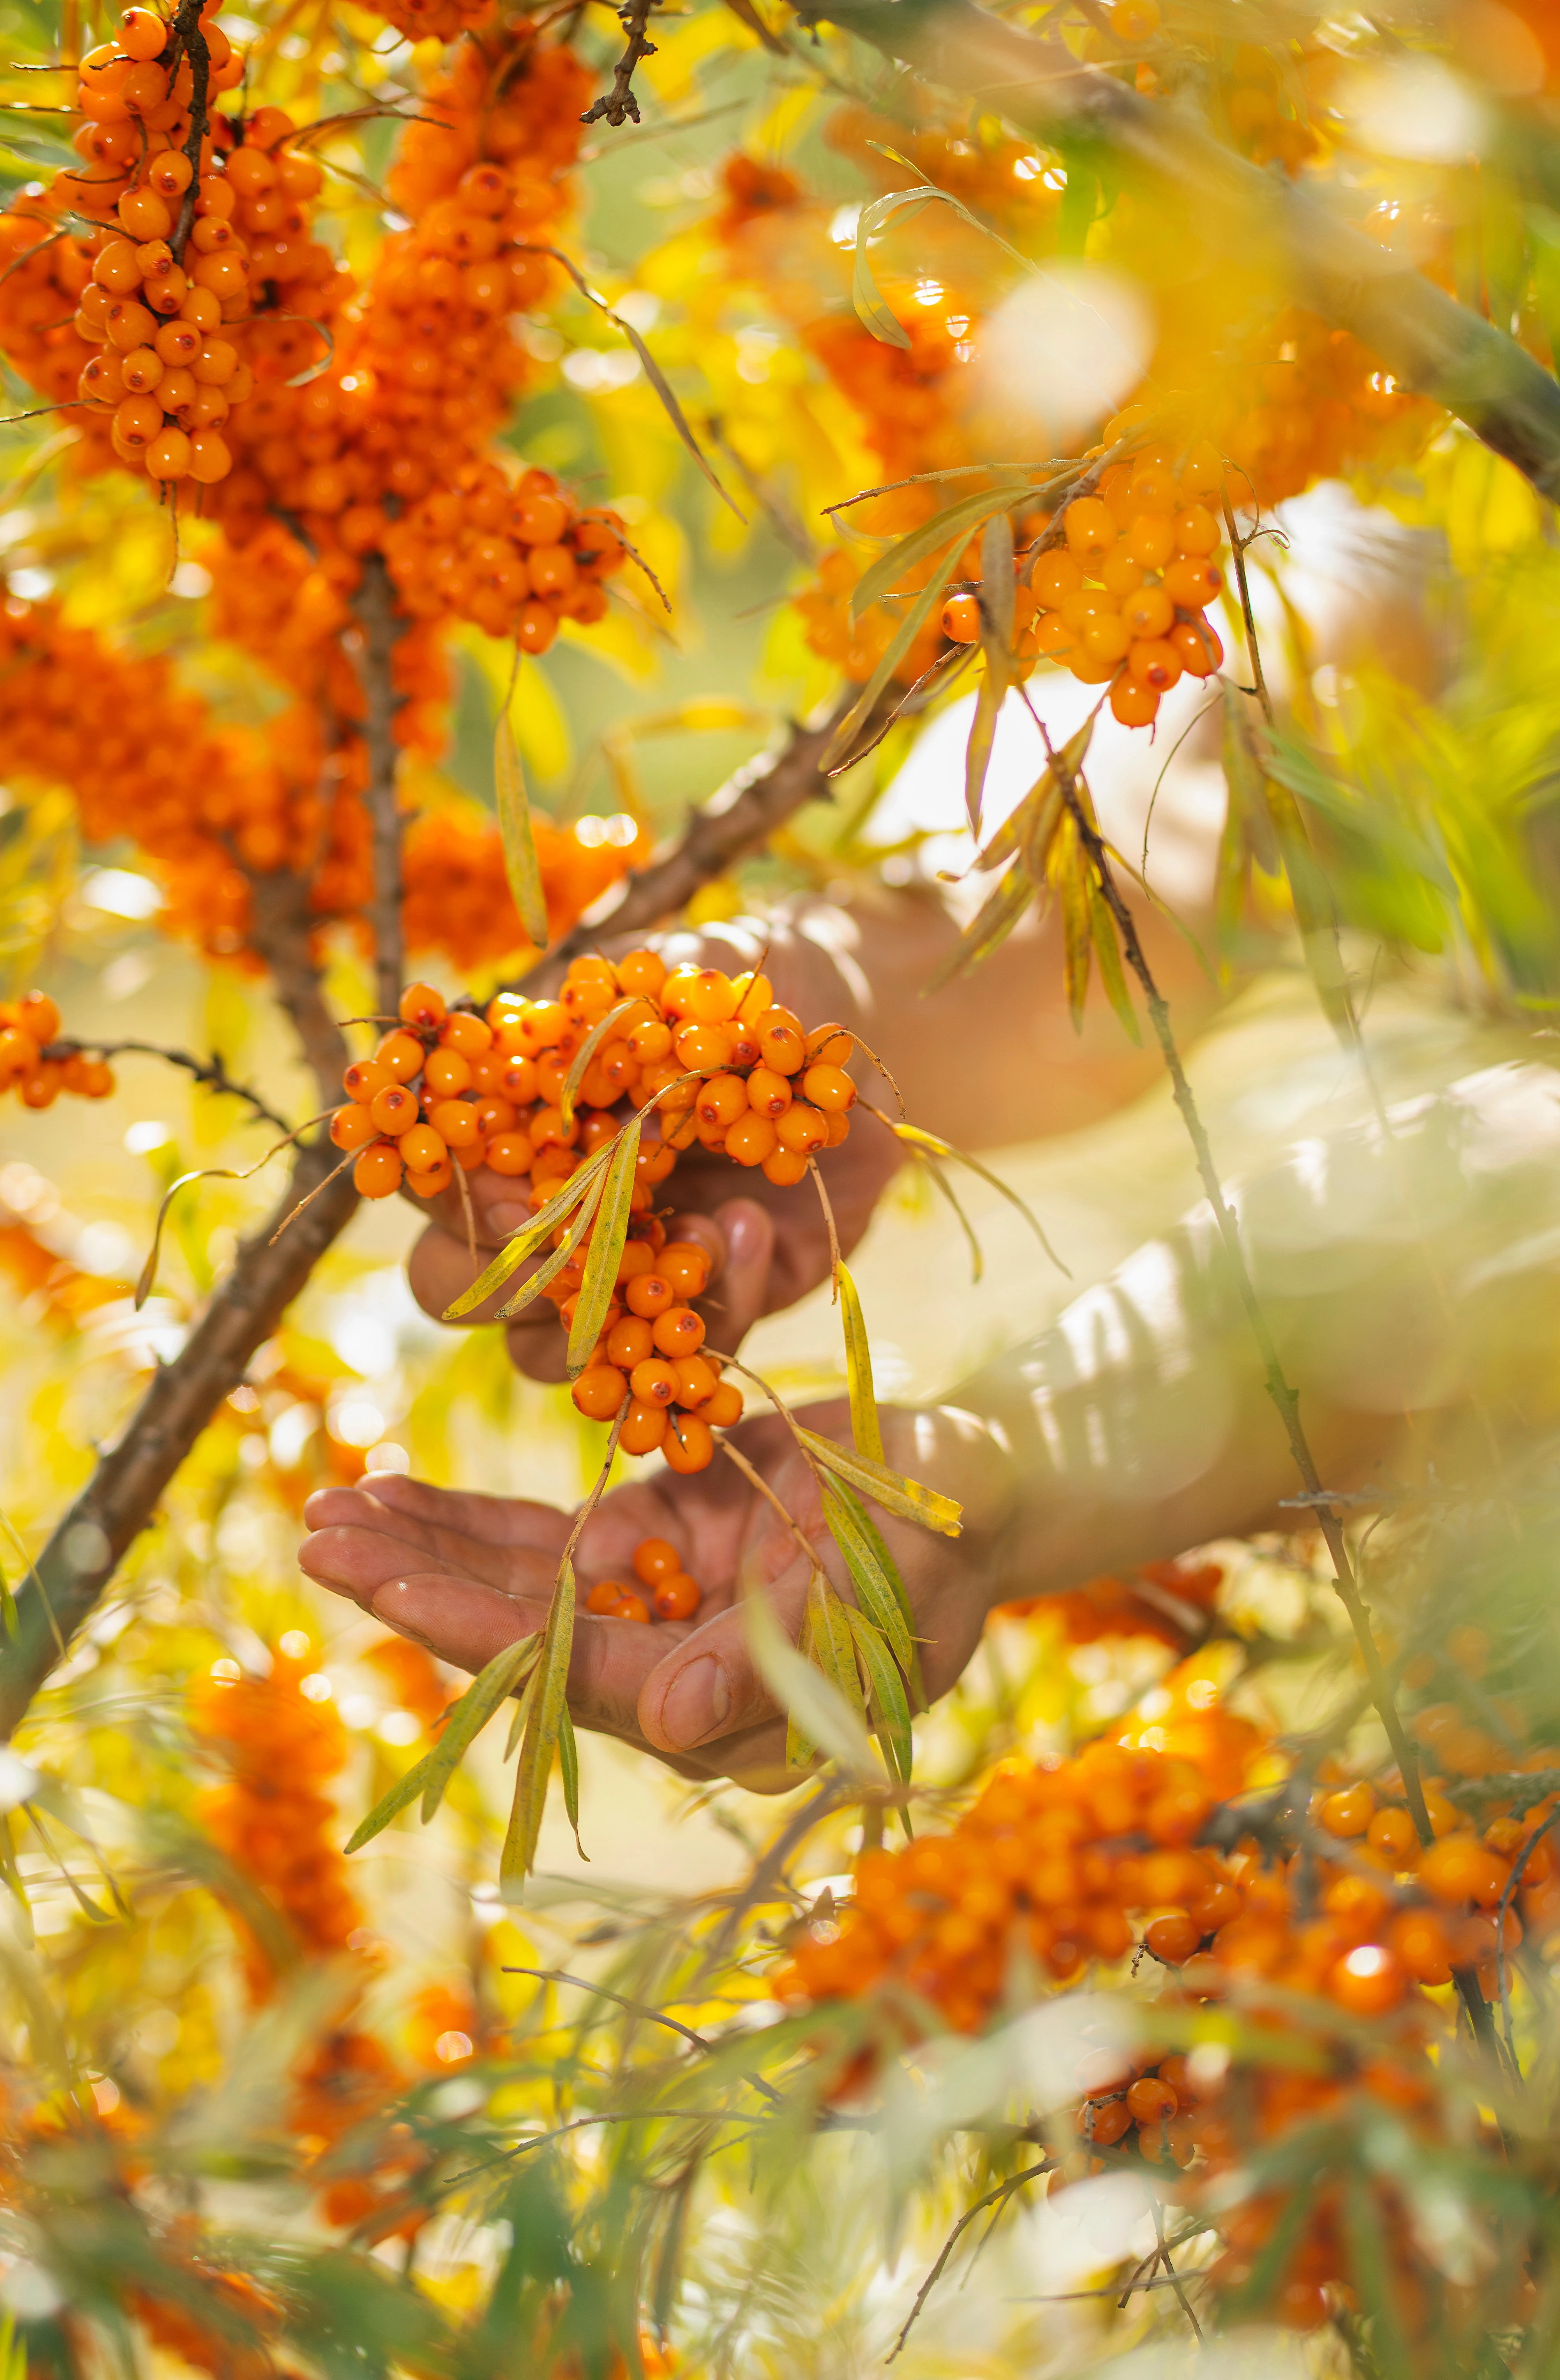 DISCOVER THE CURATIVE EFFECTS OF SEA BUCKTHORN OIL ON YOUR SKIN!